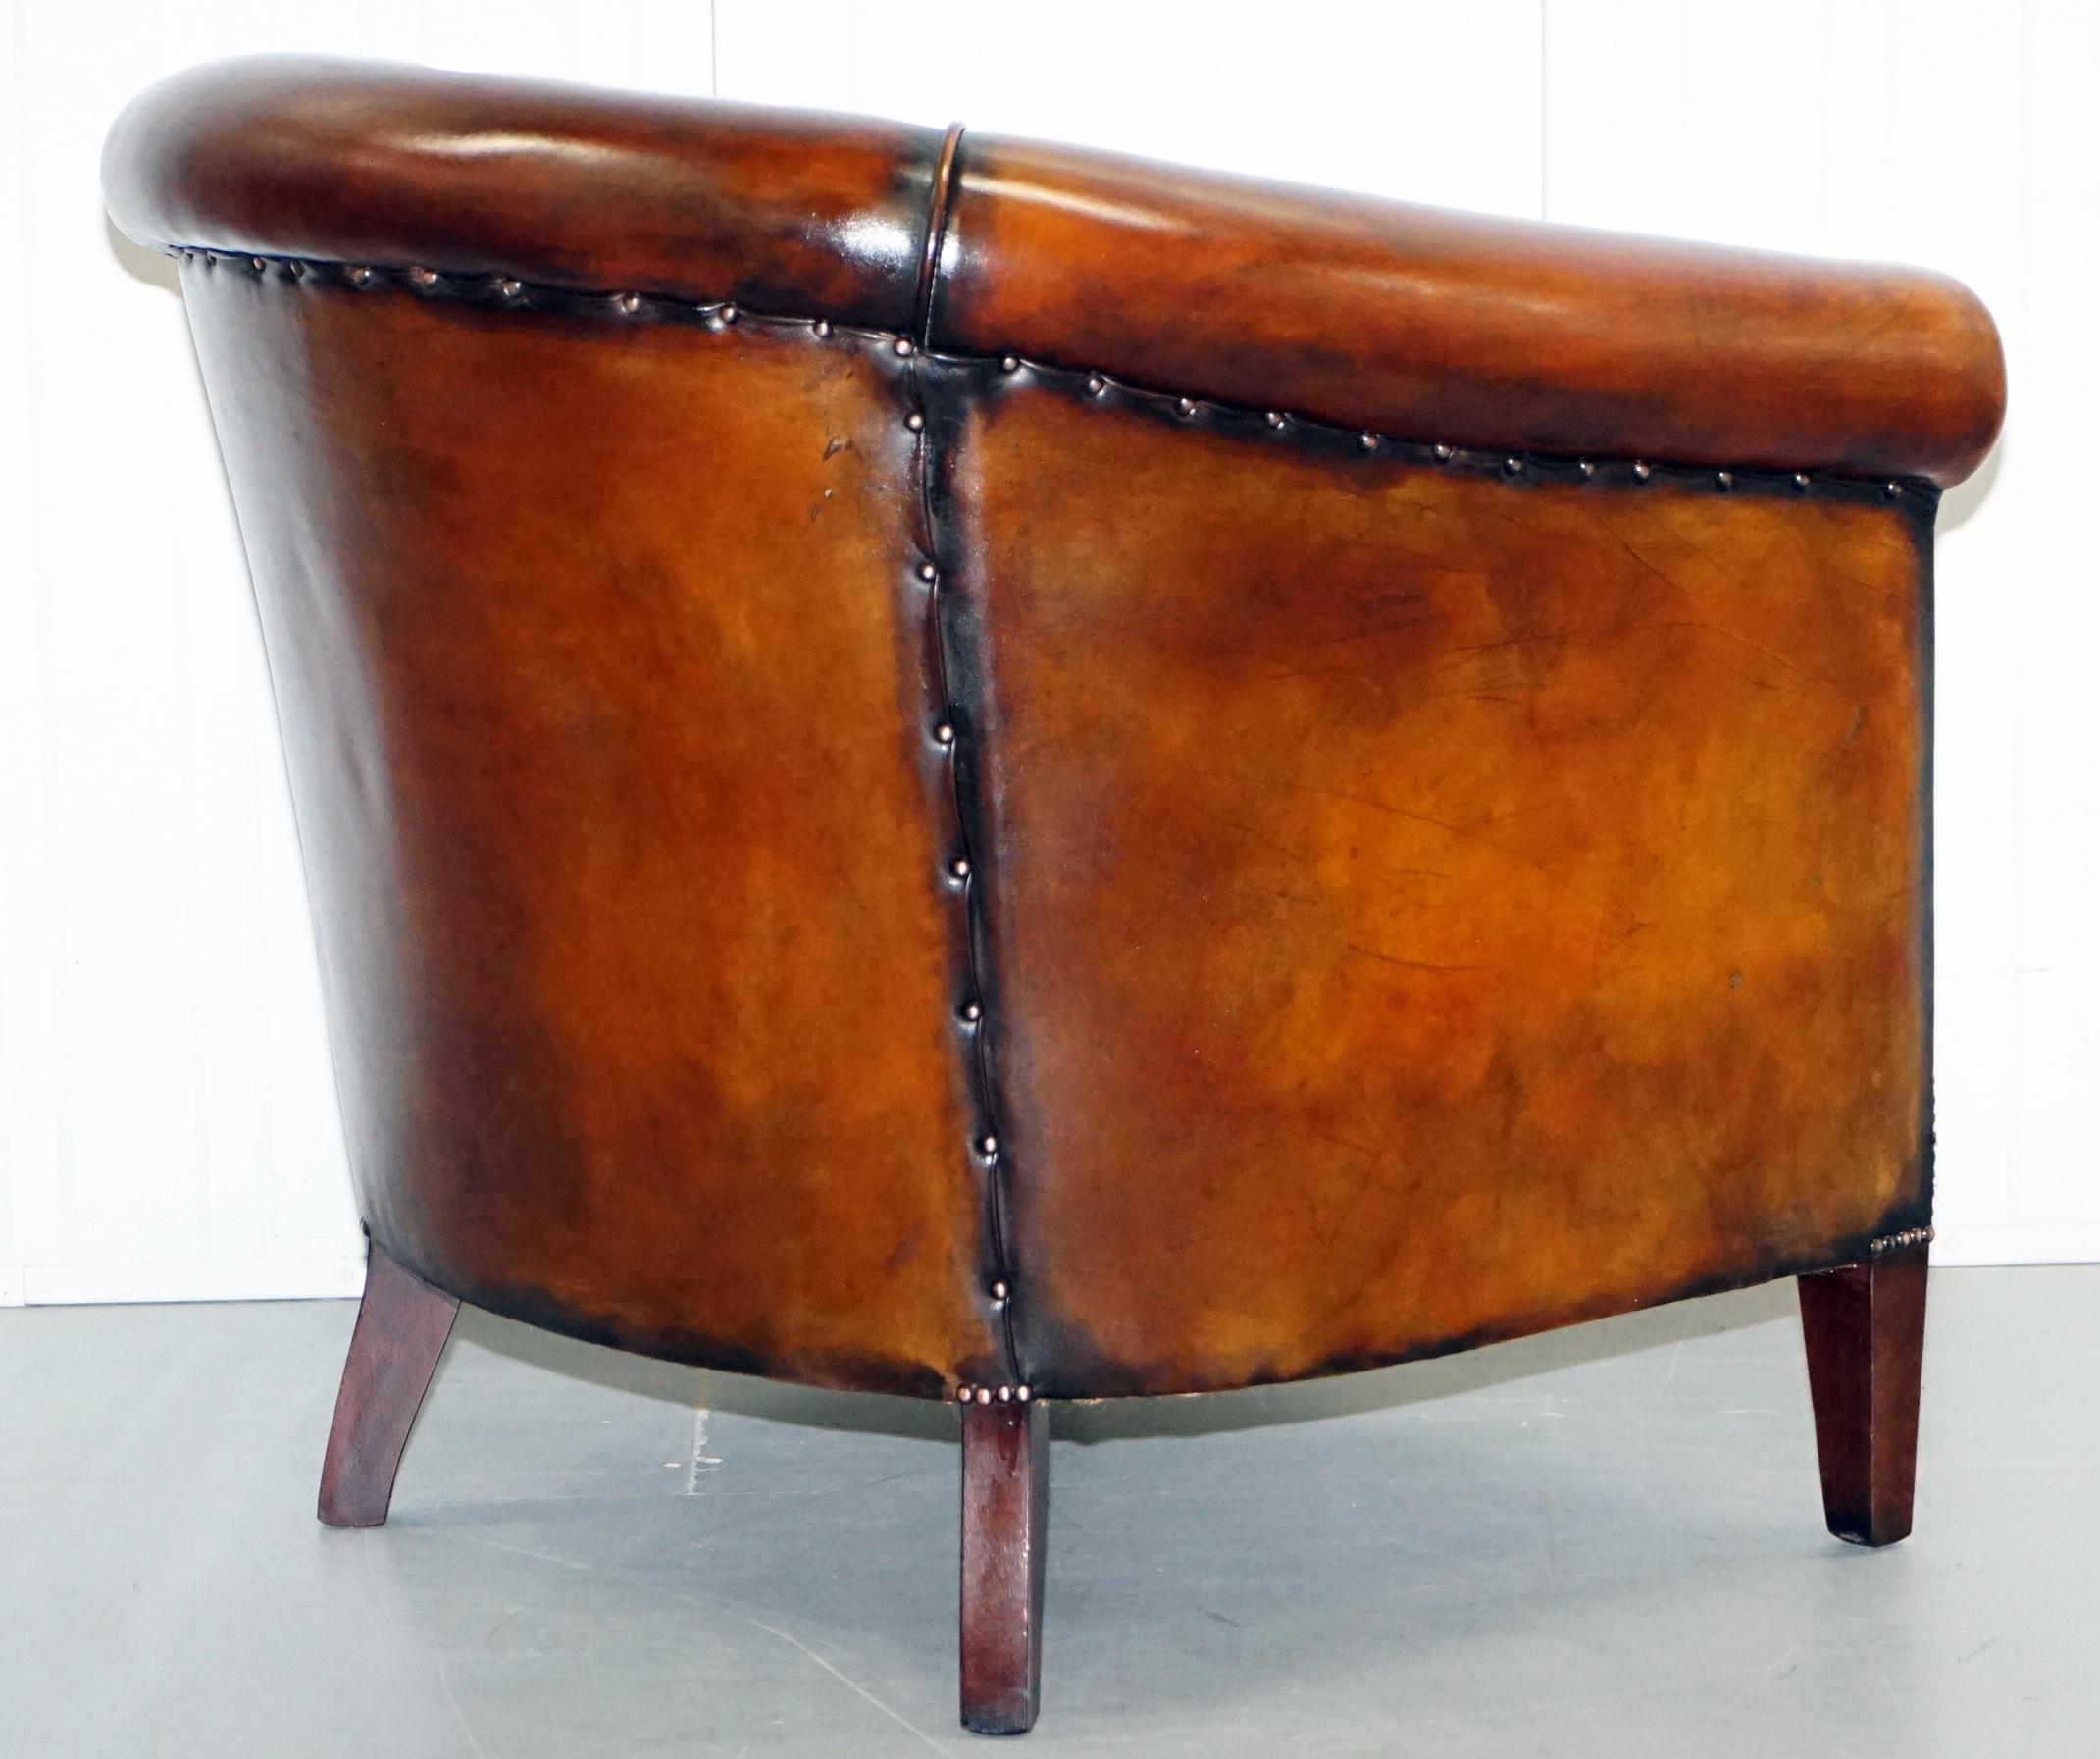 James Bond 007 Armchair from Spectre Leather Chairs of Bath Fully Restored 8